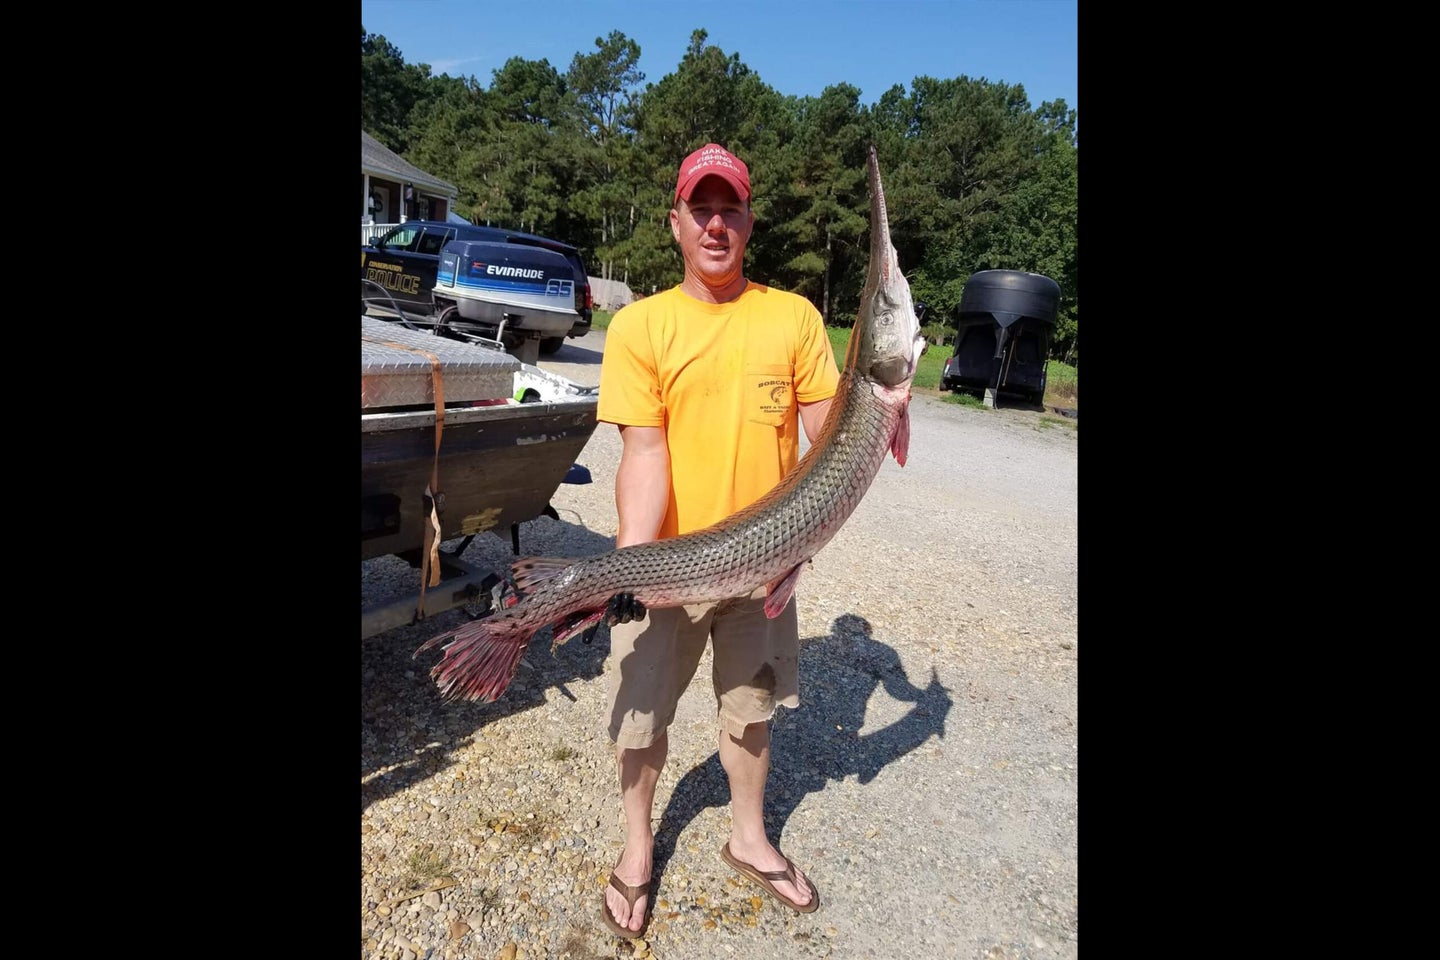 Man in yellow shirt and red t-shirt holds large gar during the day